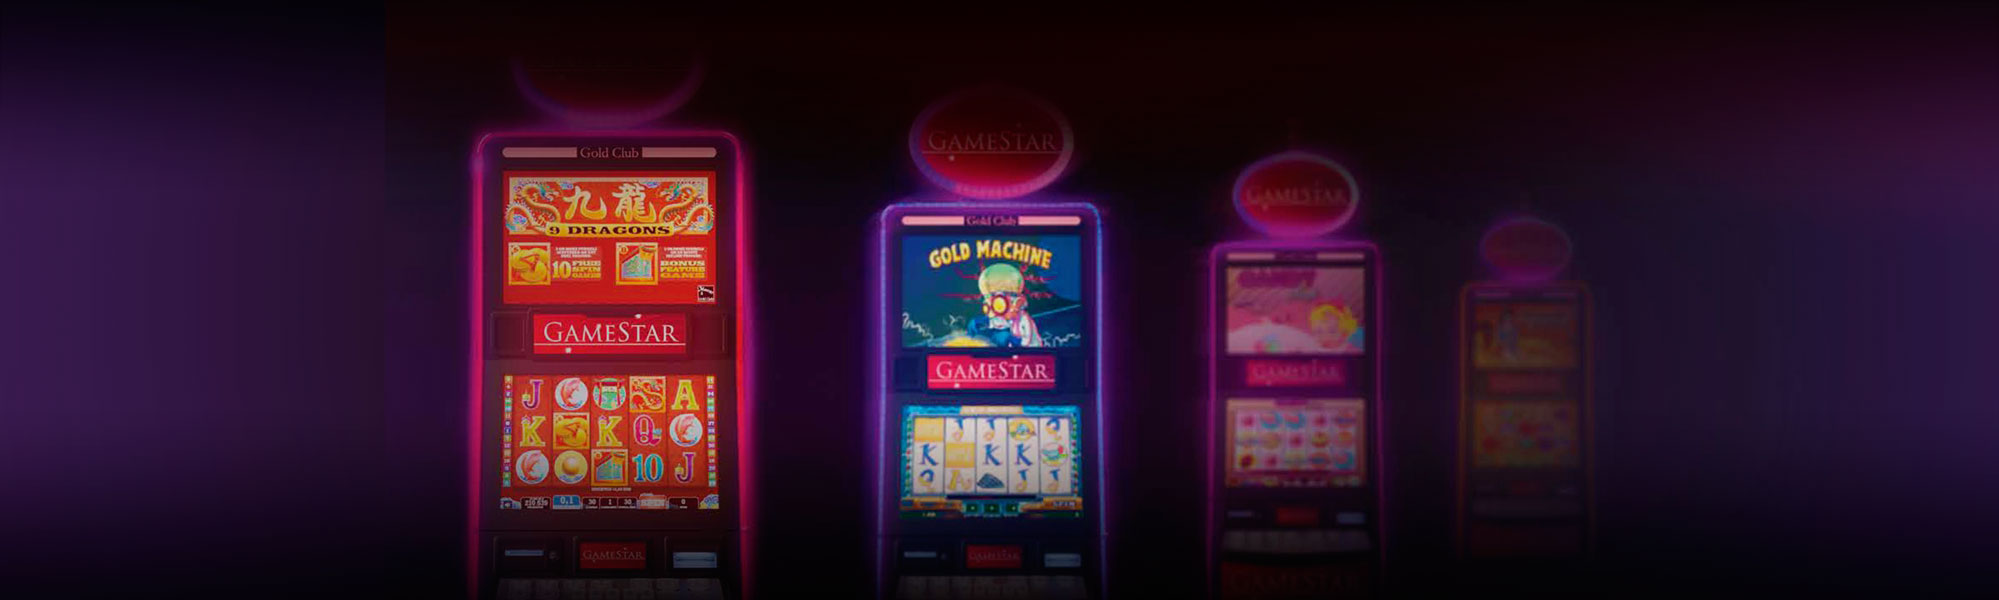 what slot machines win the most on gta 5 online